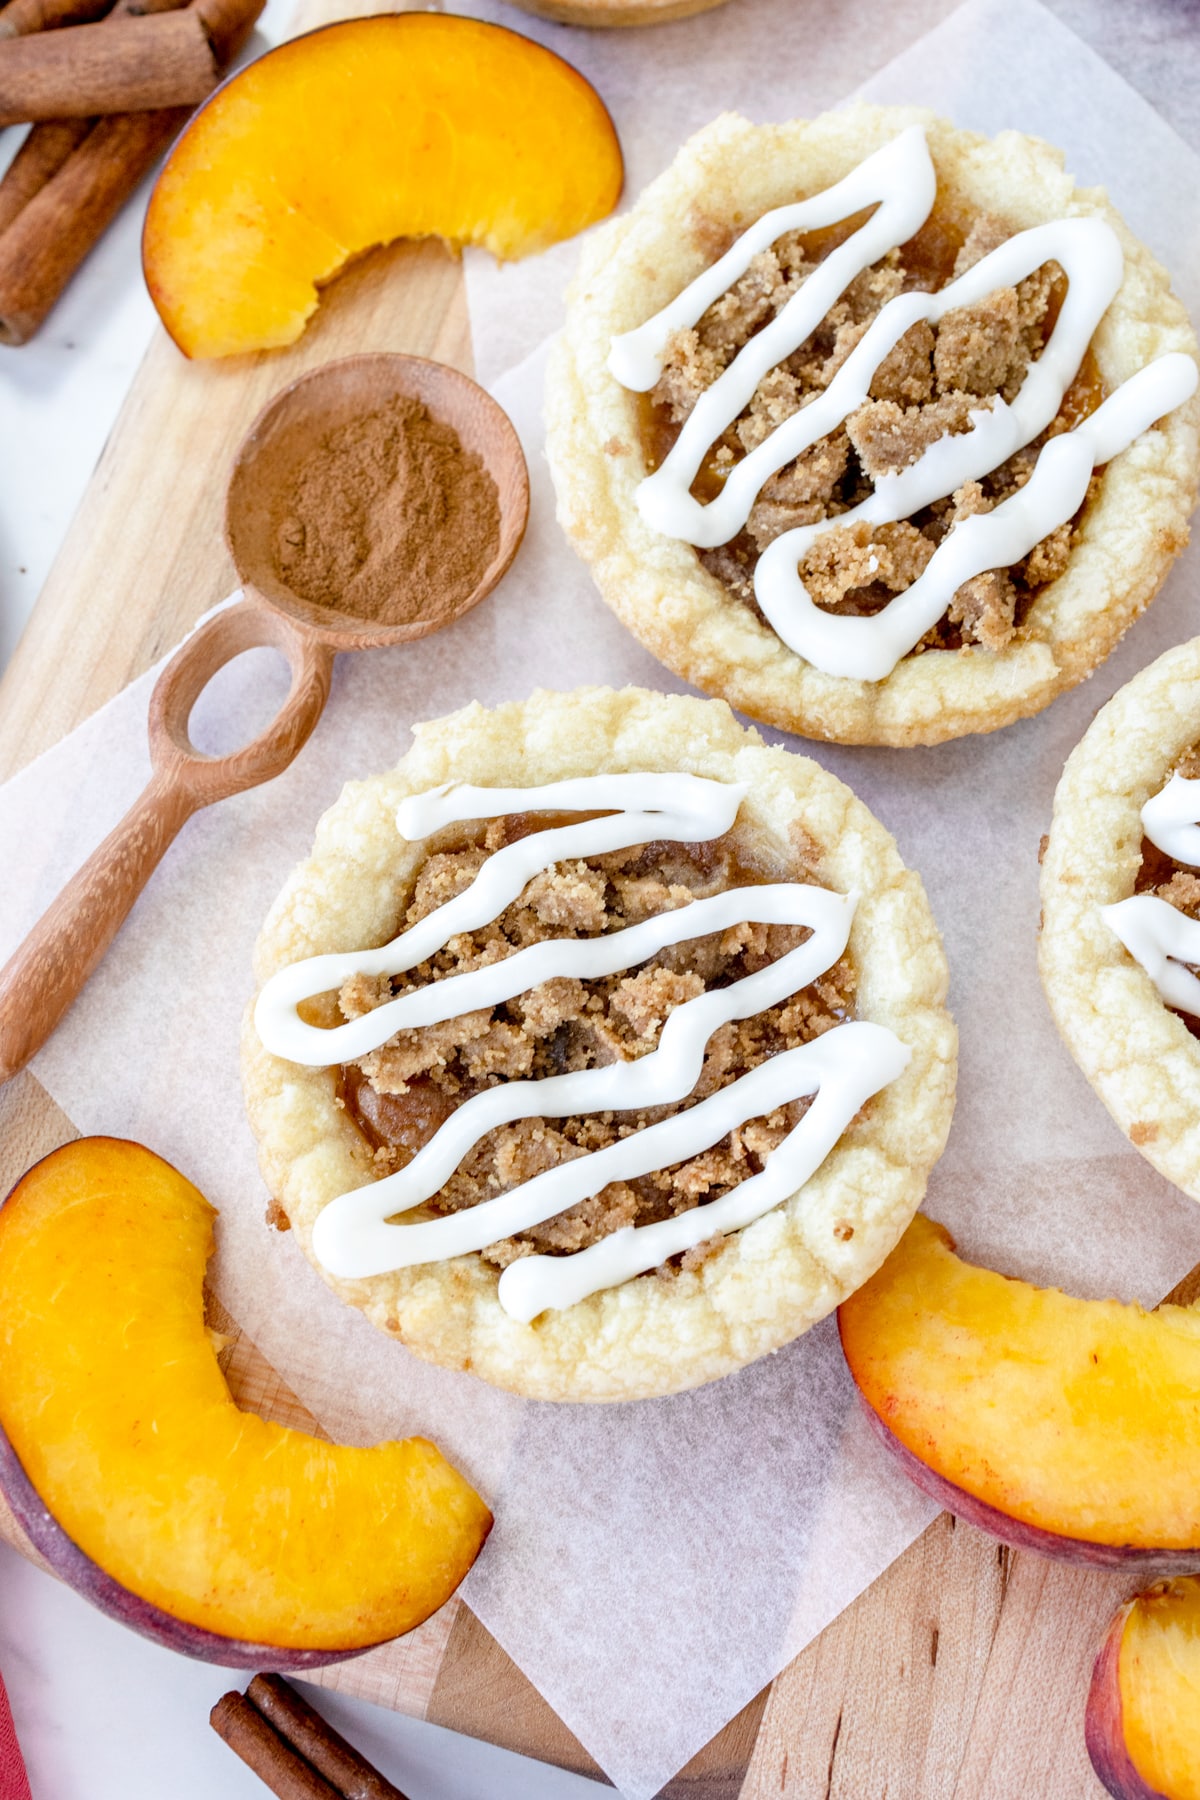 Top view of peach cobbler cookies on a white surface with peach slices around them.